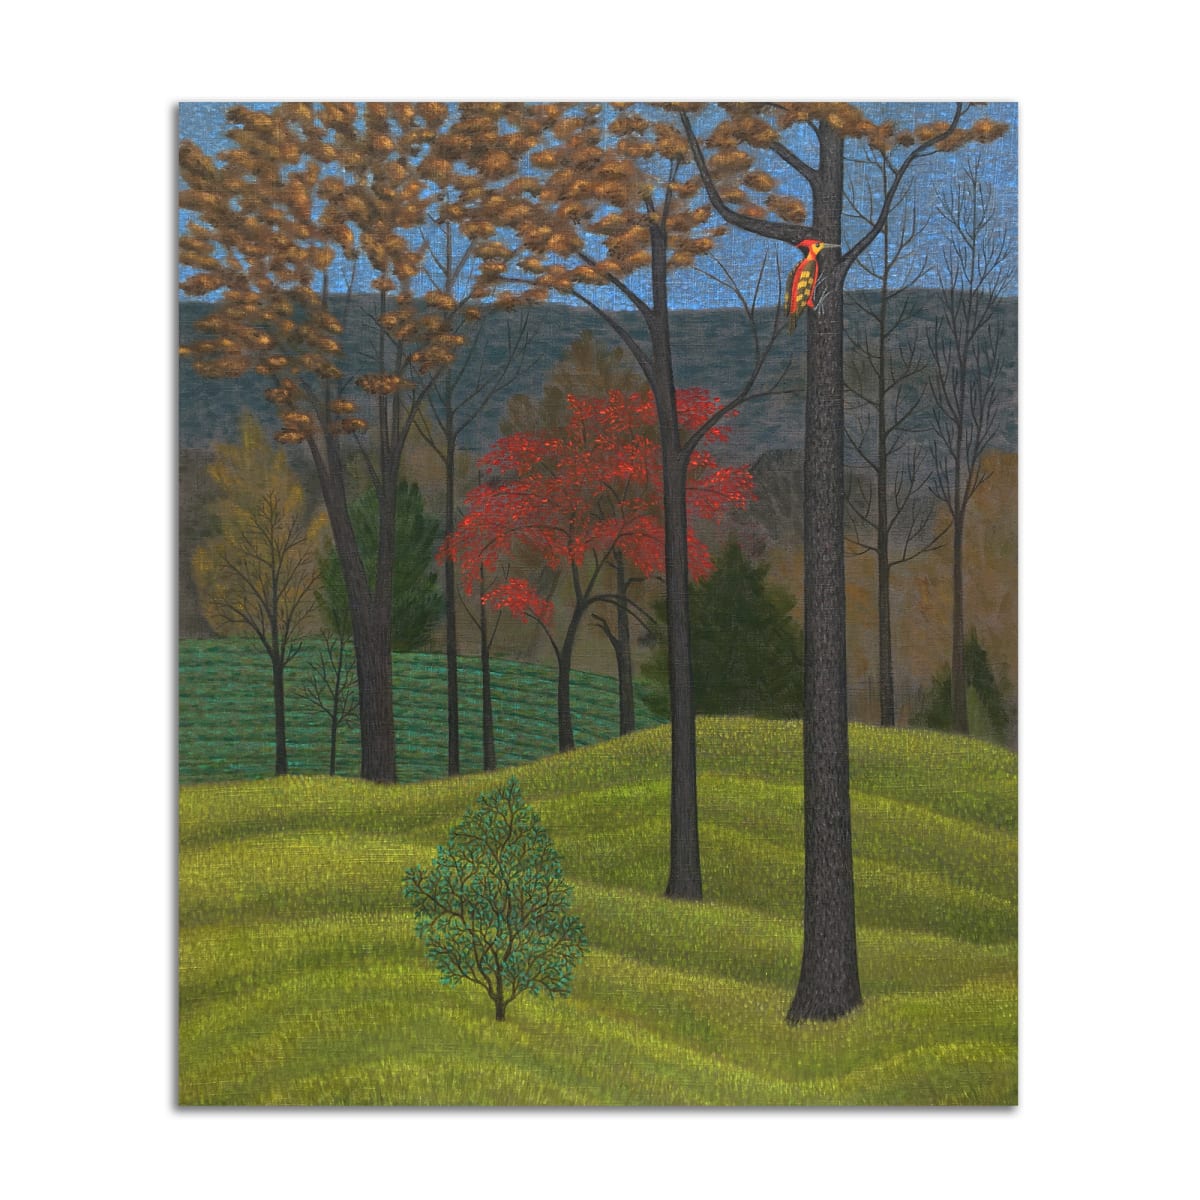 Landscape with Red Tree and Woodpecker by Jane Troup 